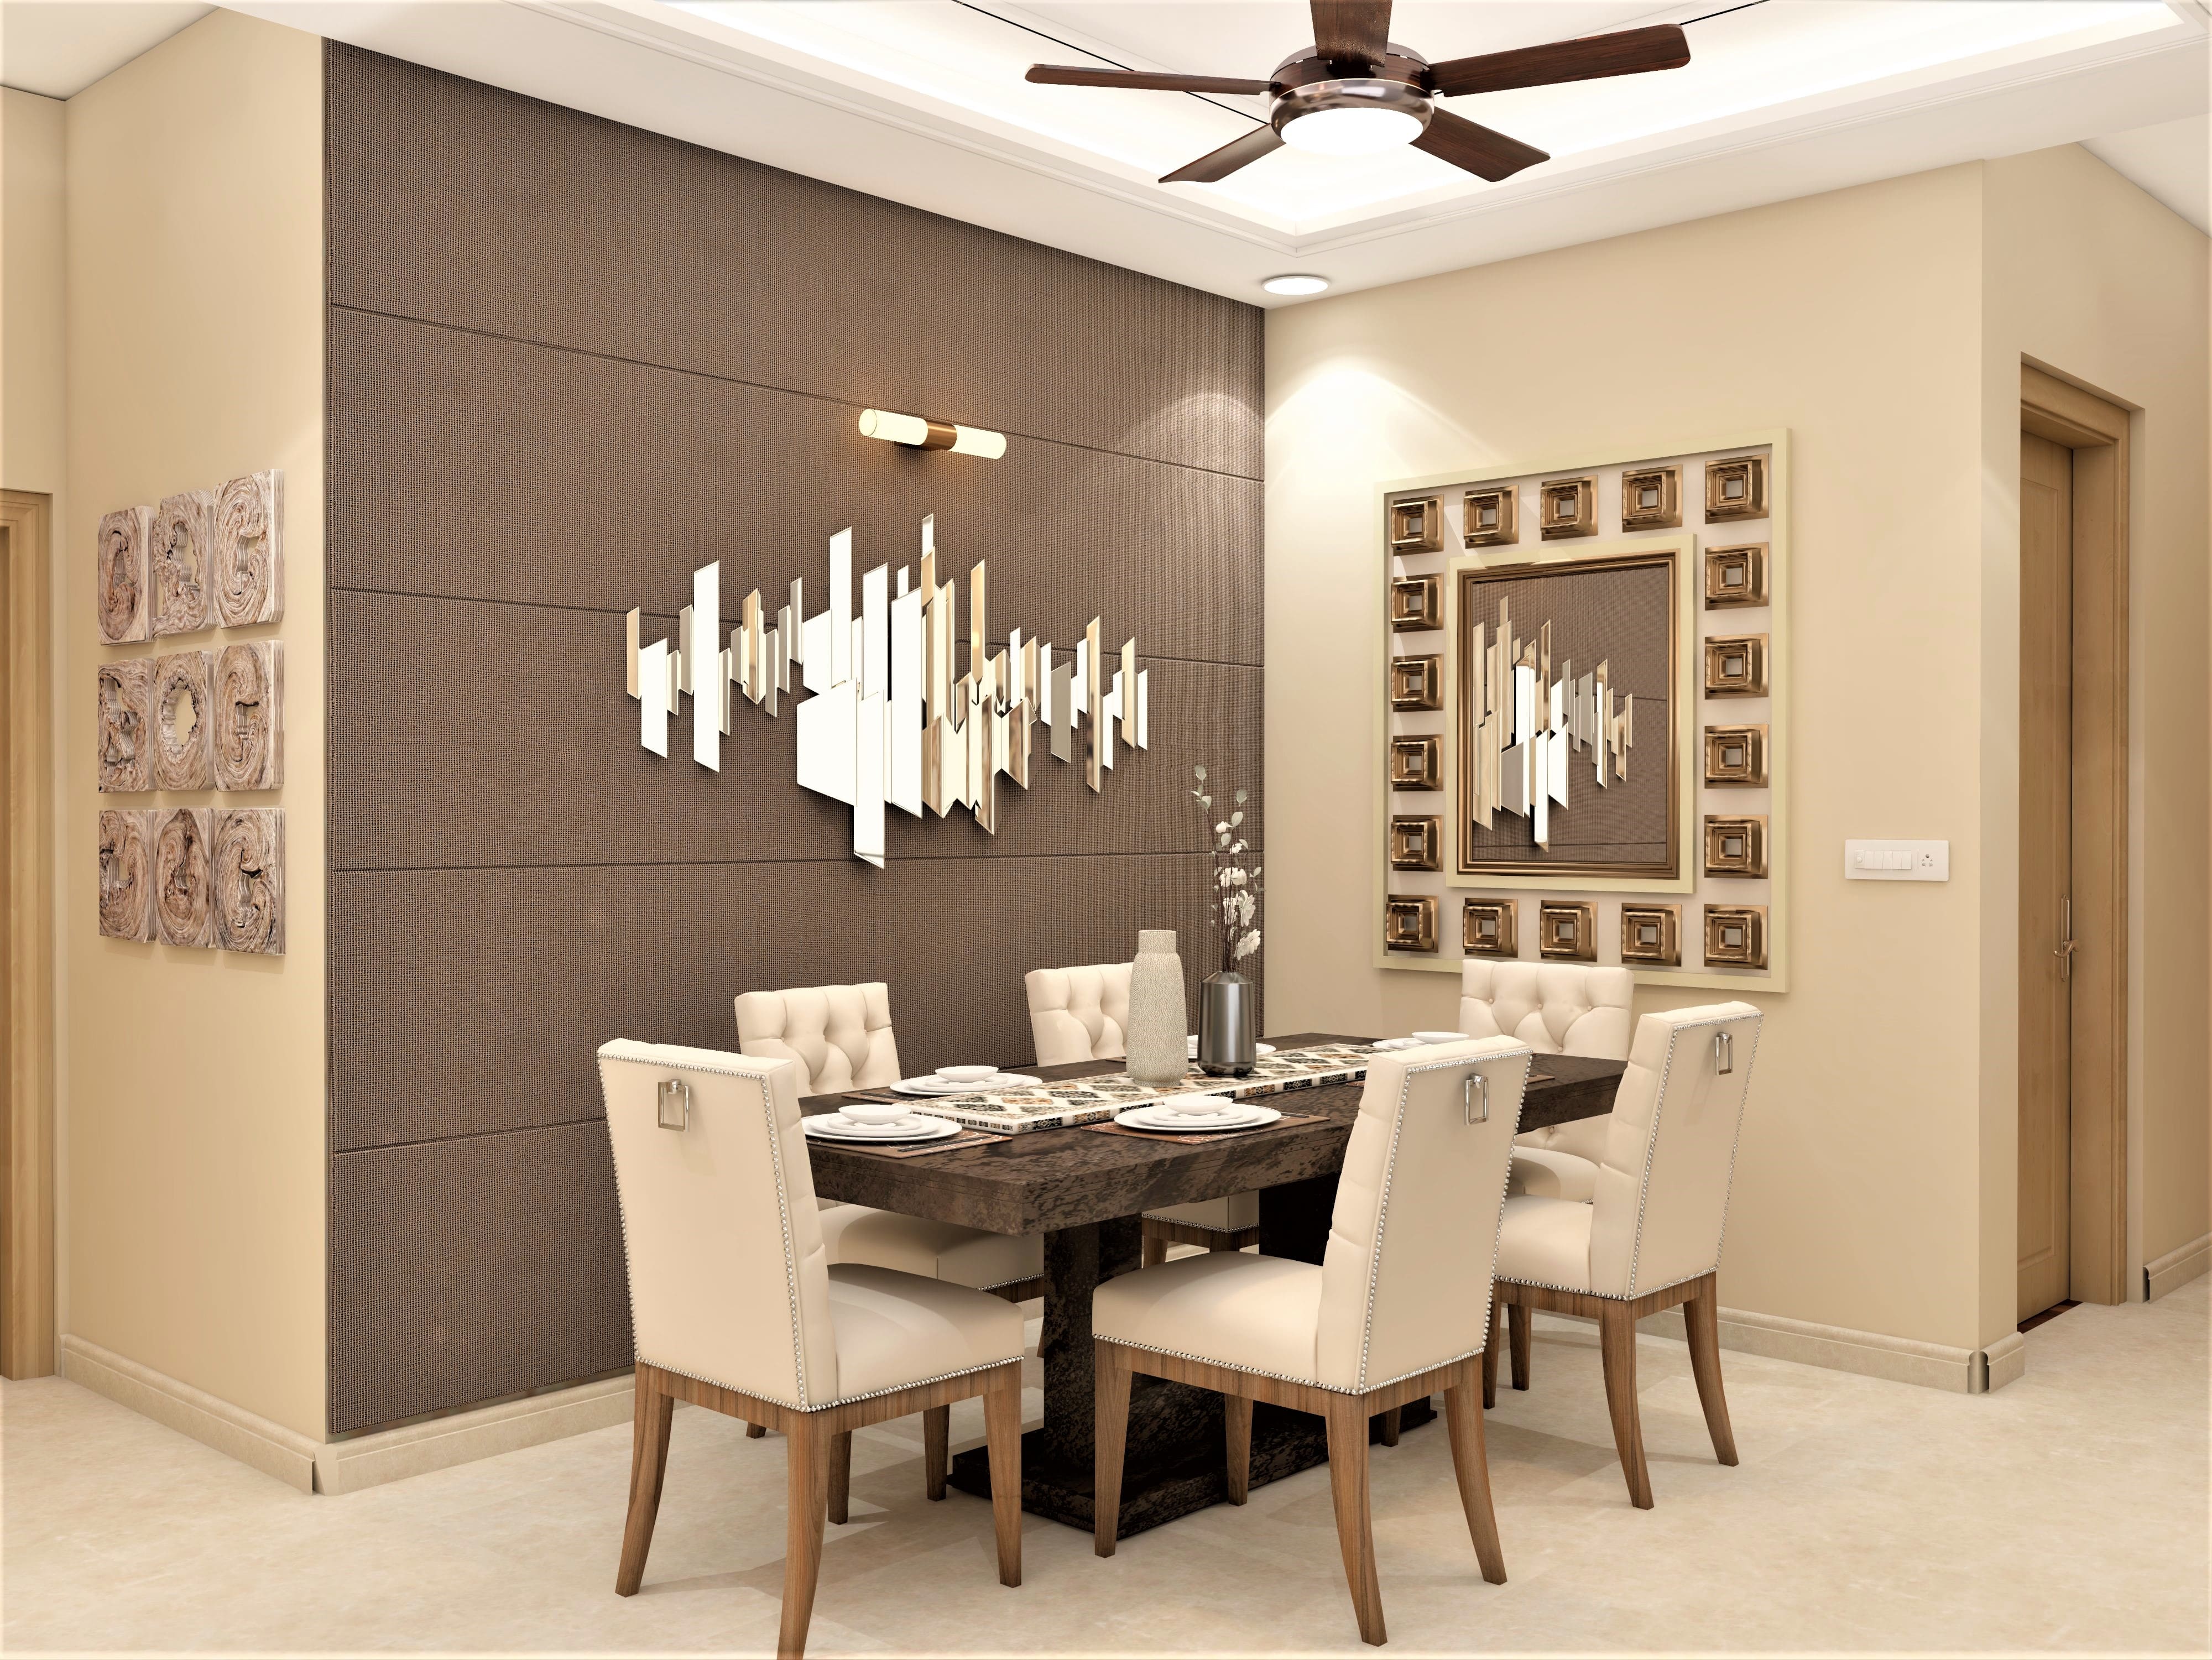 Dining room design dressed in neutrals - Beautiful Homes